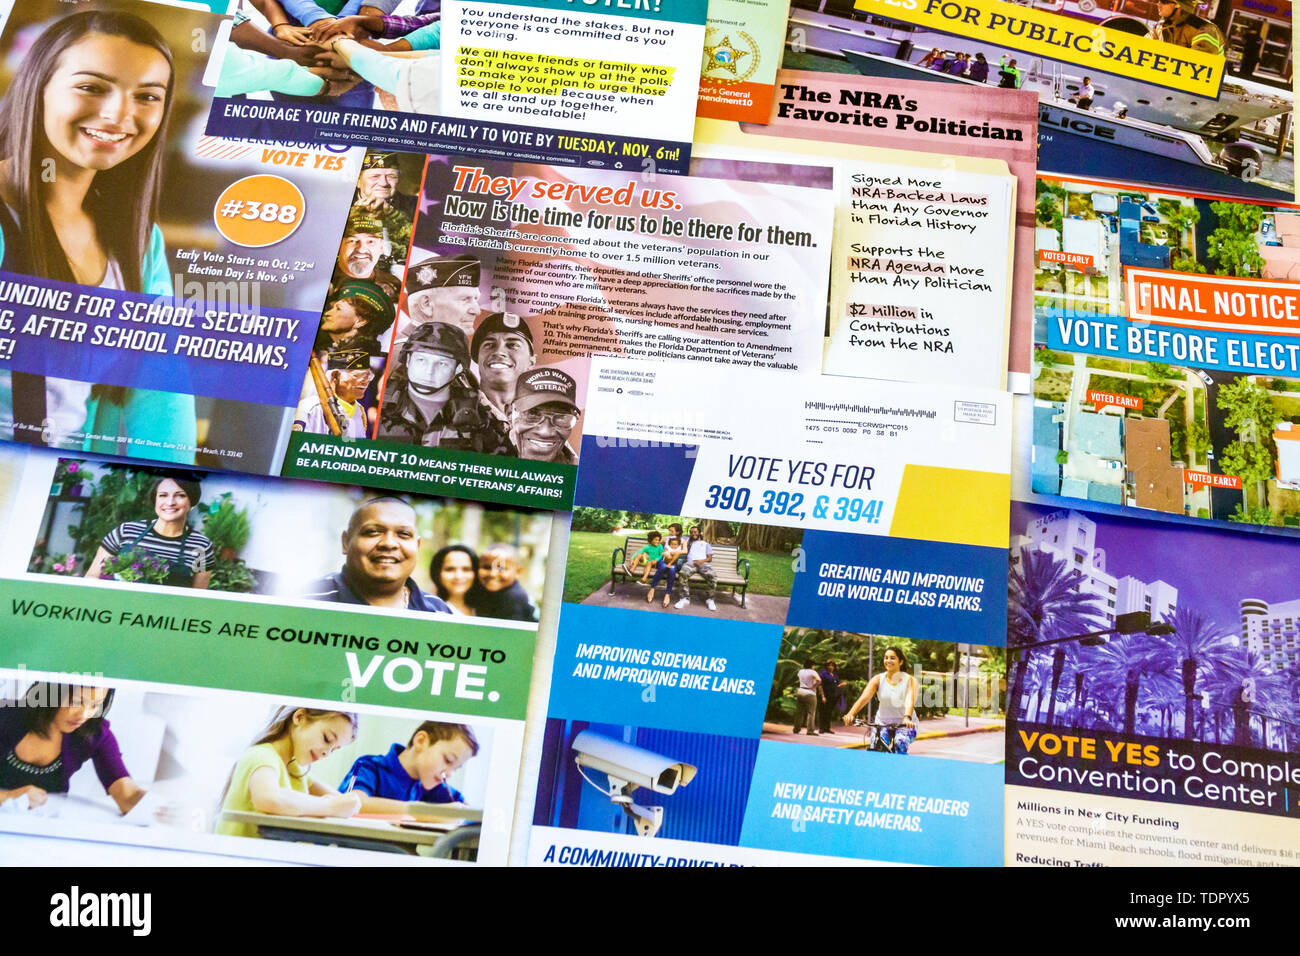 Miami Beach Florida,voting advice campaign campaigns mailers issue issues,negative campaigning,election flyers,FL190511063 Stock Photo